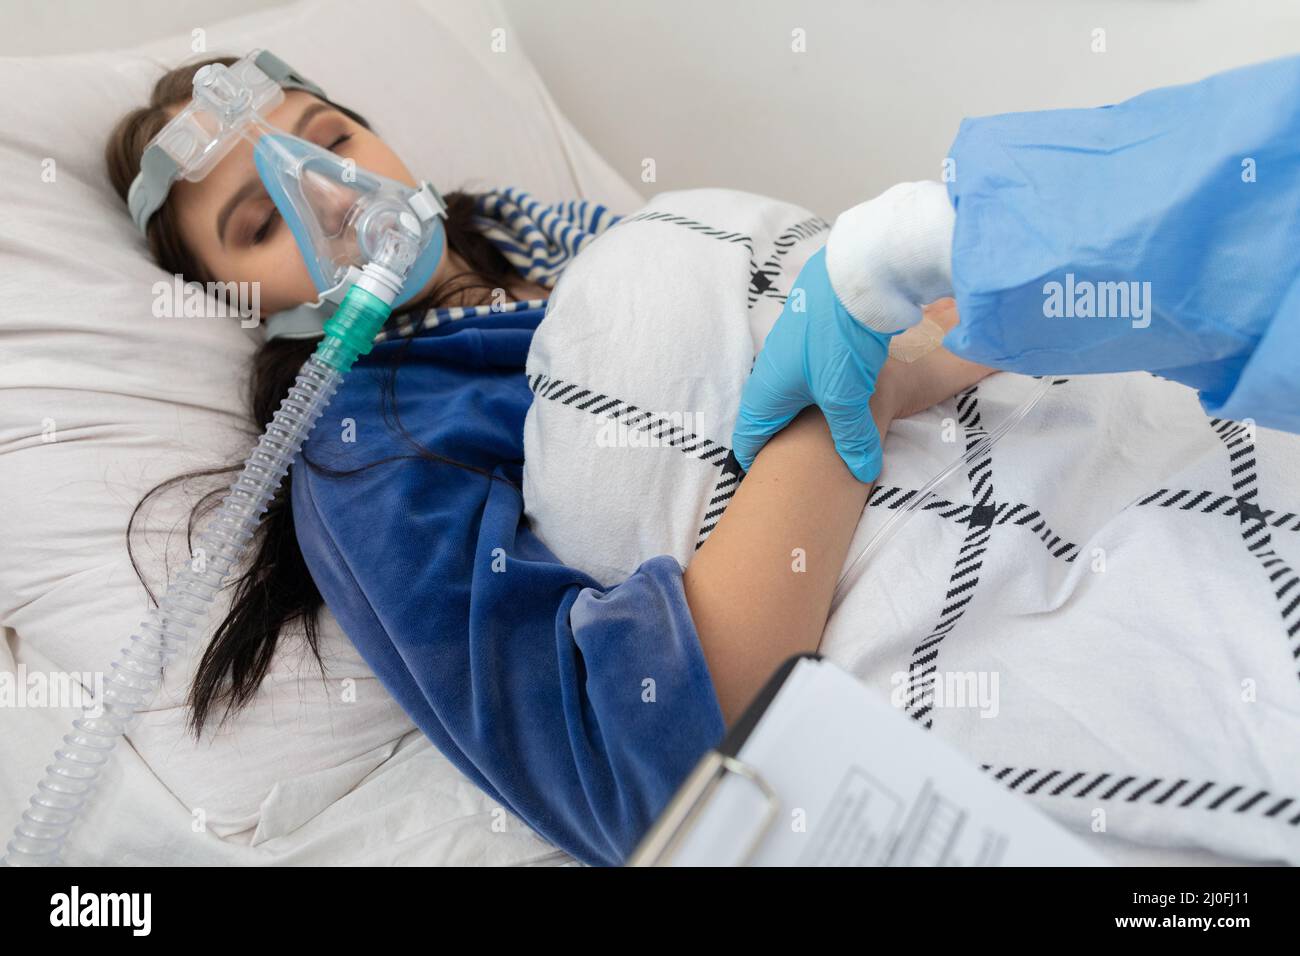 The attending doctor checks the pulse on the wrist of a young teenager lying on a hospital bed. Stock Photo